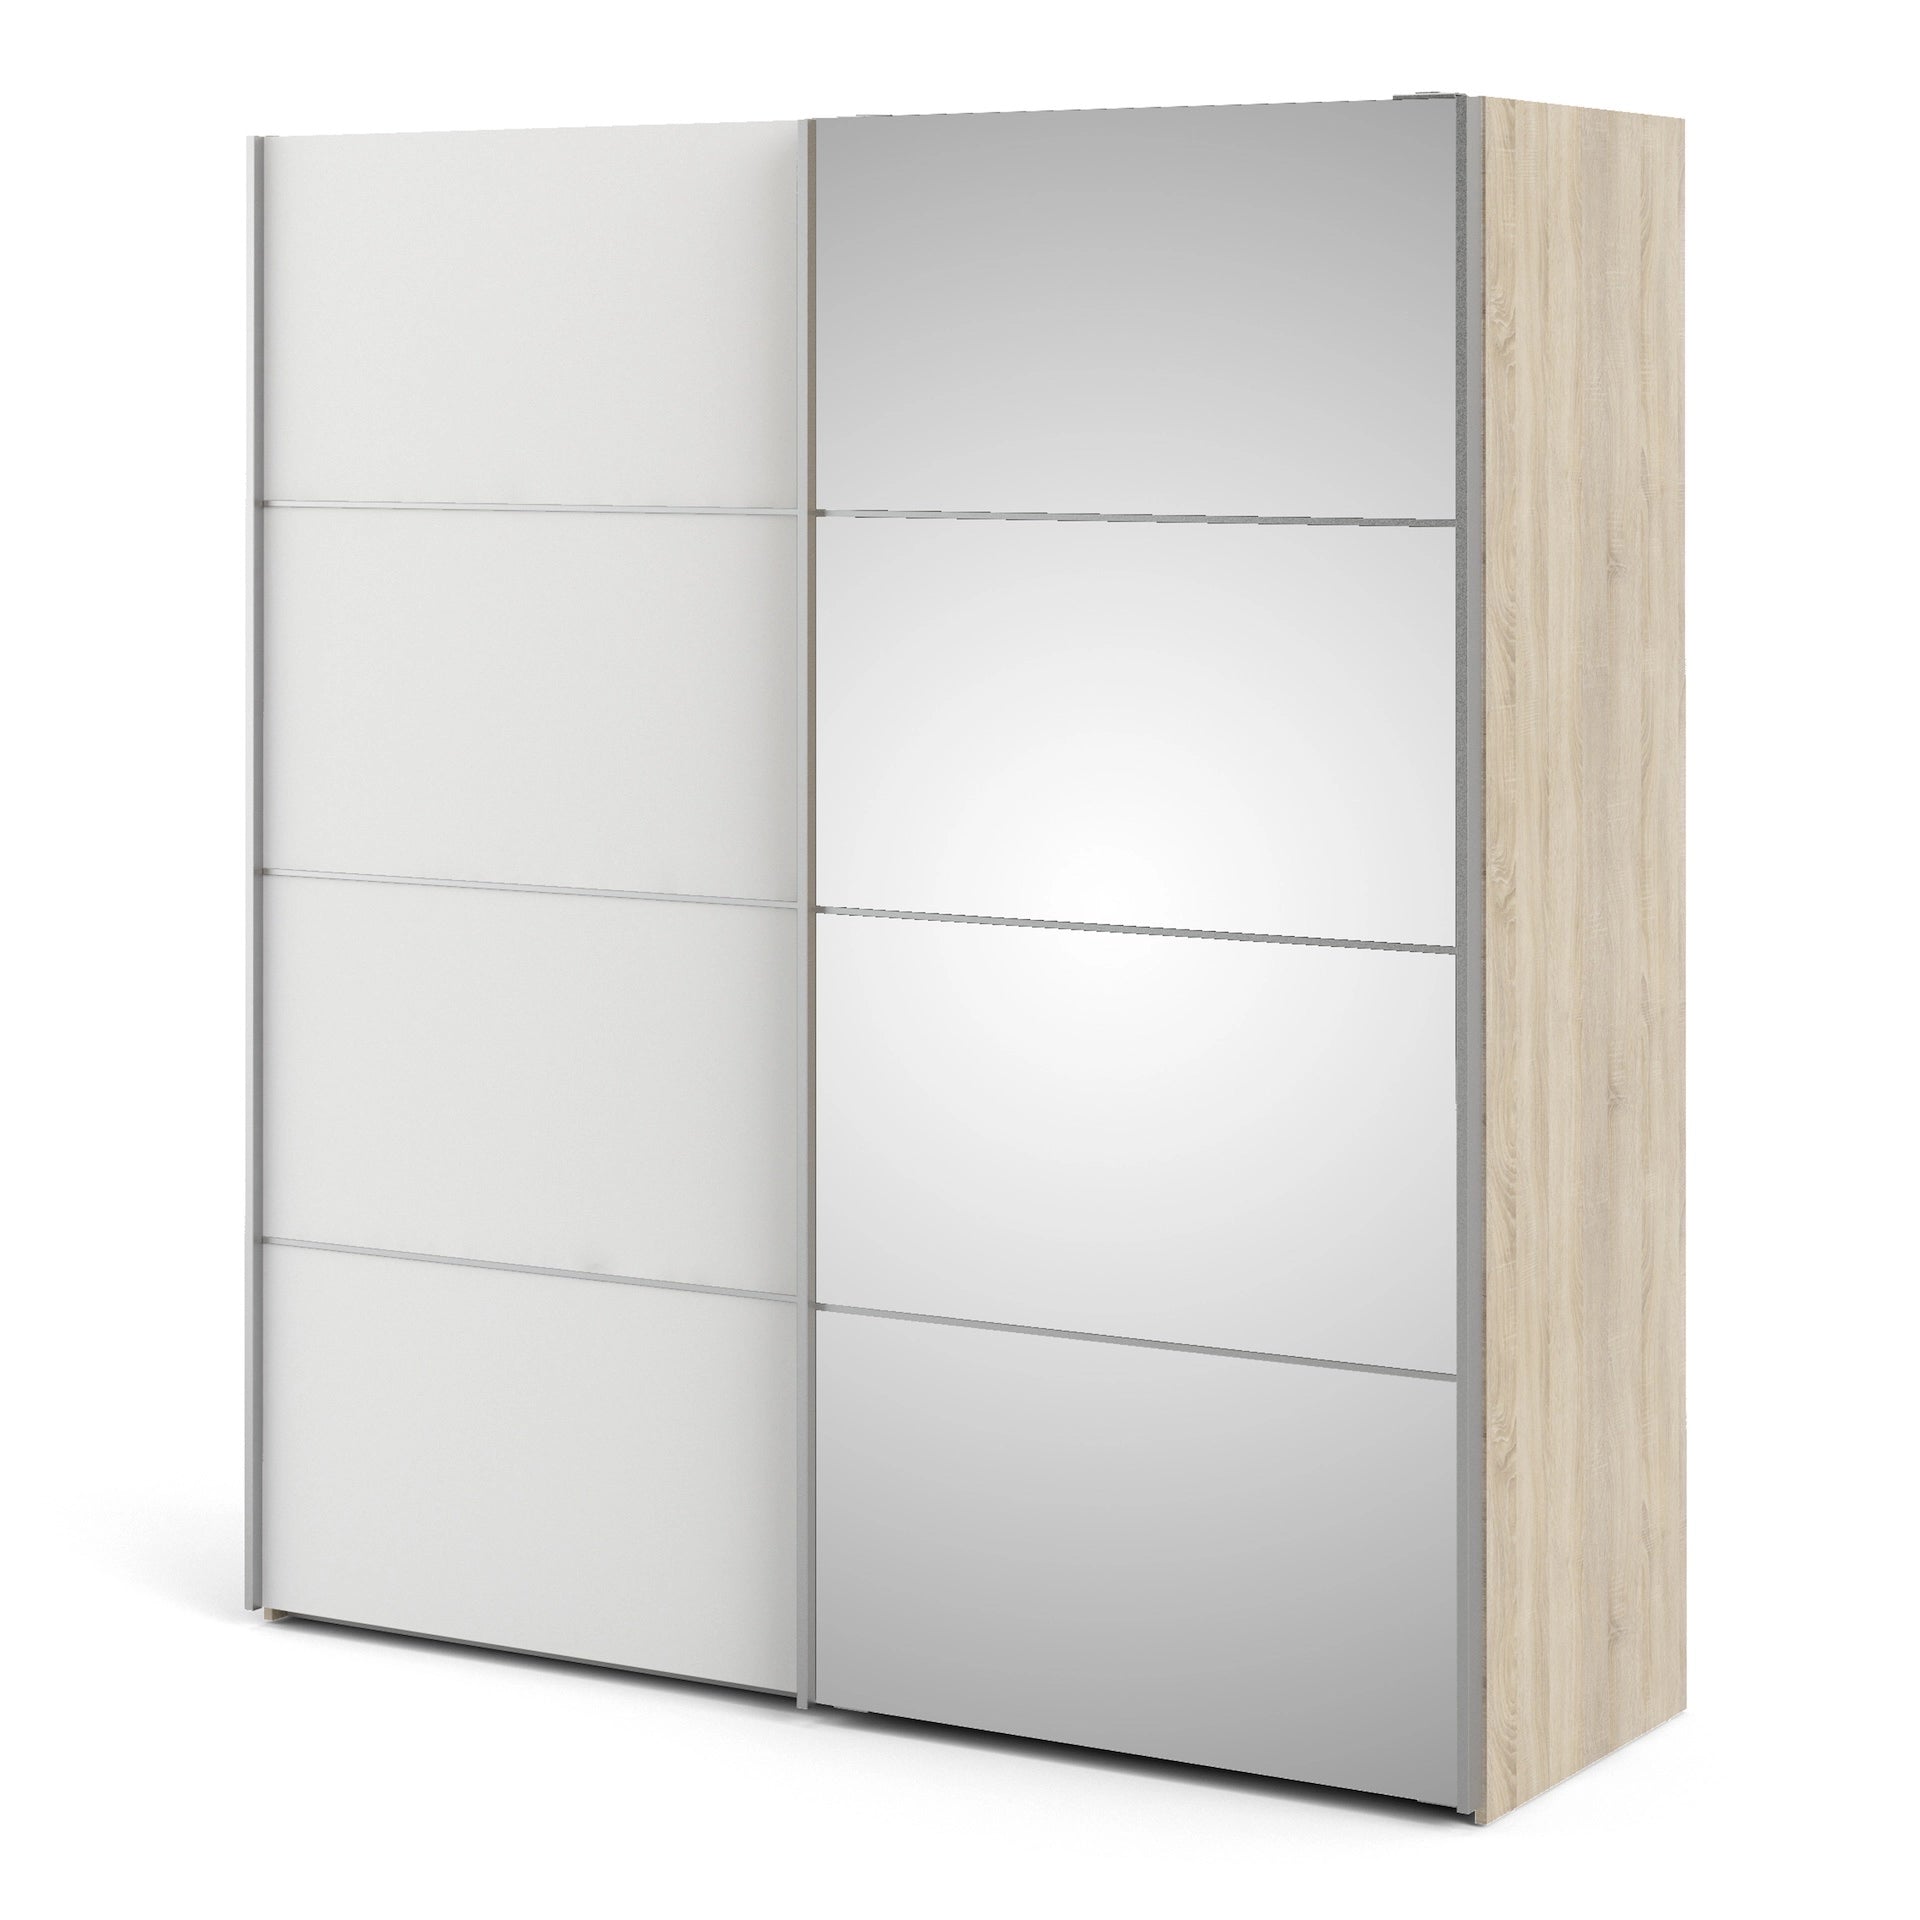 Furniture To Go Verona Sliding Wardrobe 180cm in Oak with White & Mirror Doors with 5 Shelves